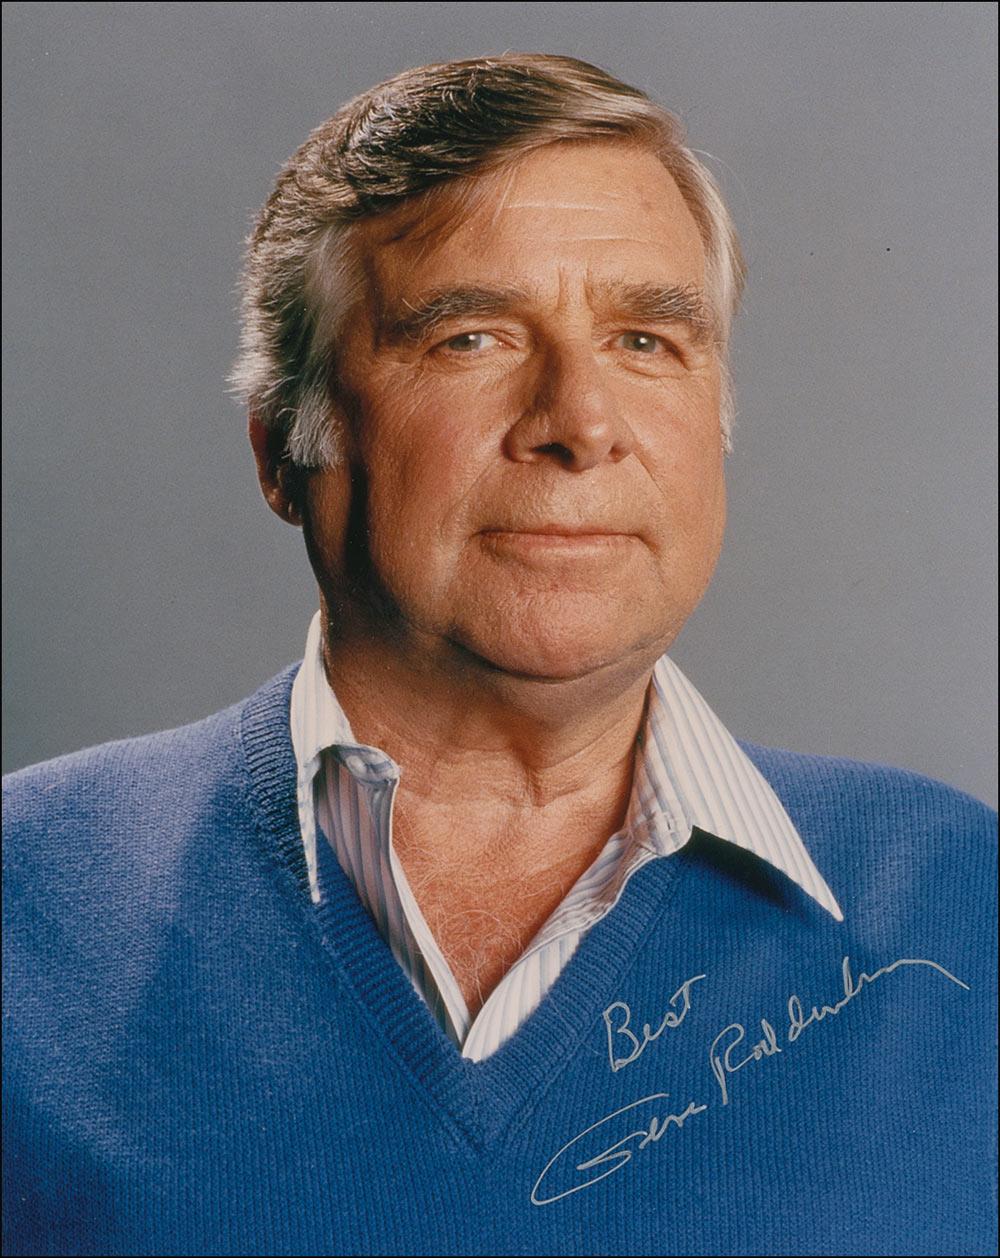 View the biography of Gene Roddenberry